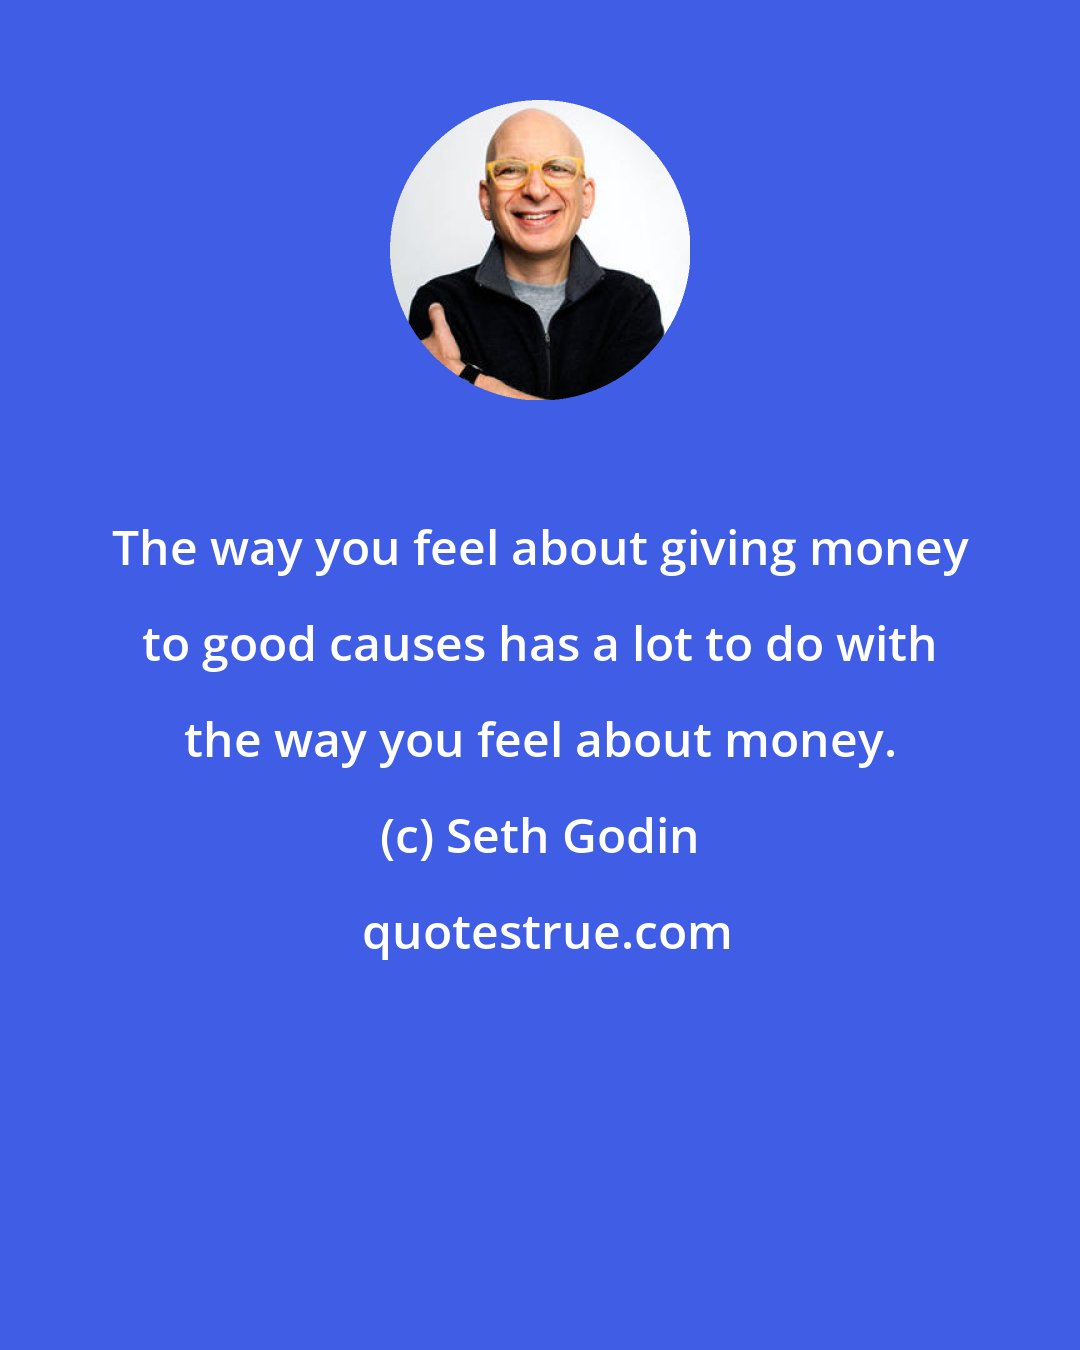 Seth Godin: The way you feel about giving money to good causes has a lot to do with the way you feel about money.